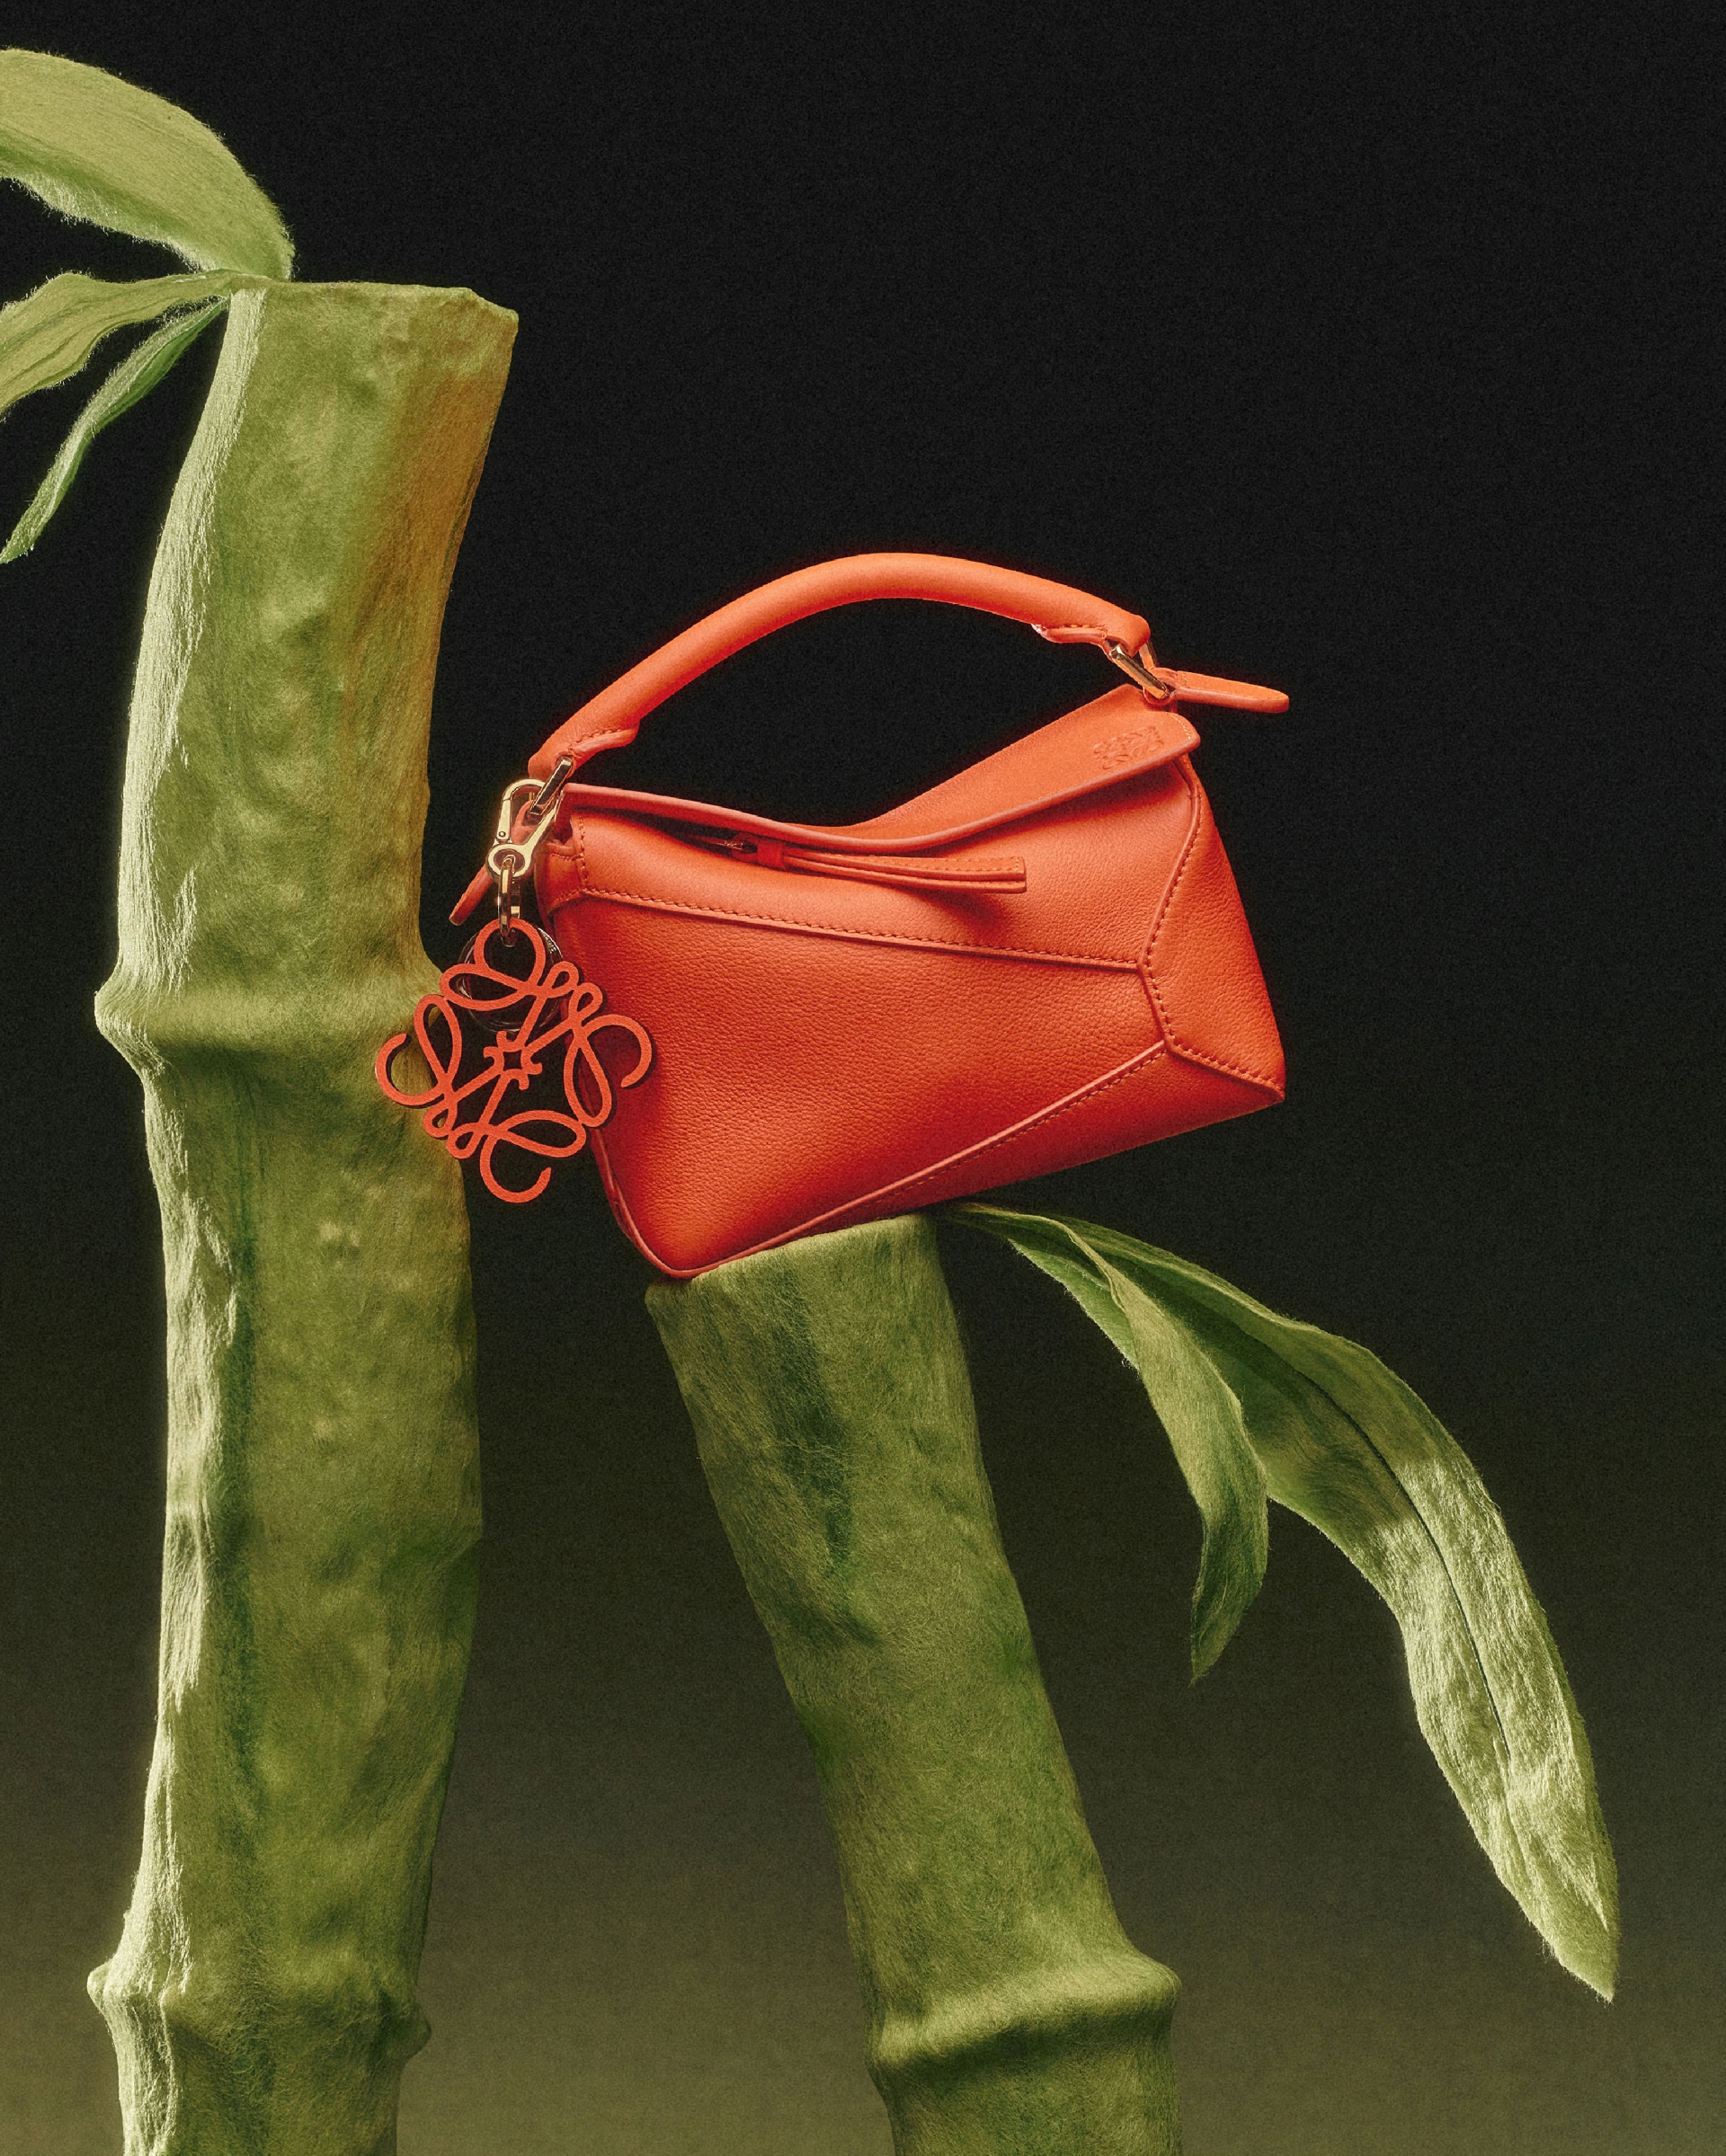 Loewe Holidays Collection – A Celebration of Craft